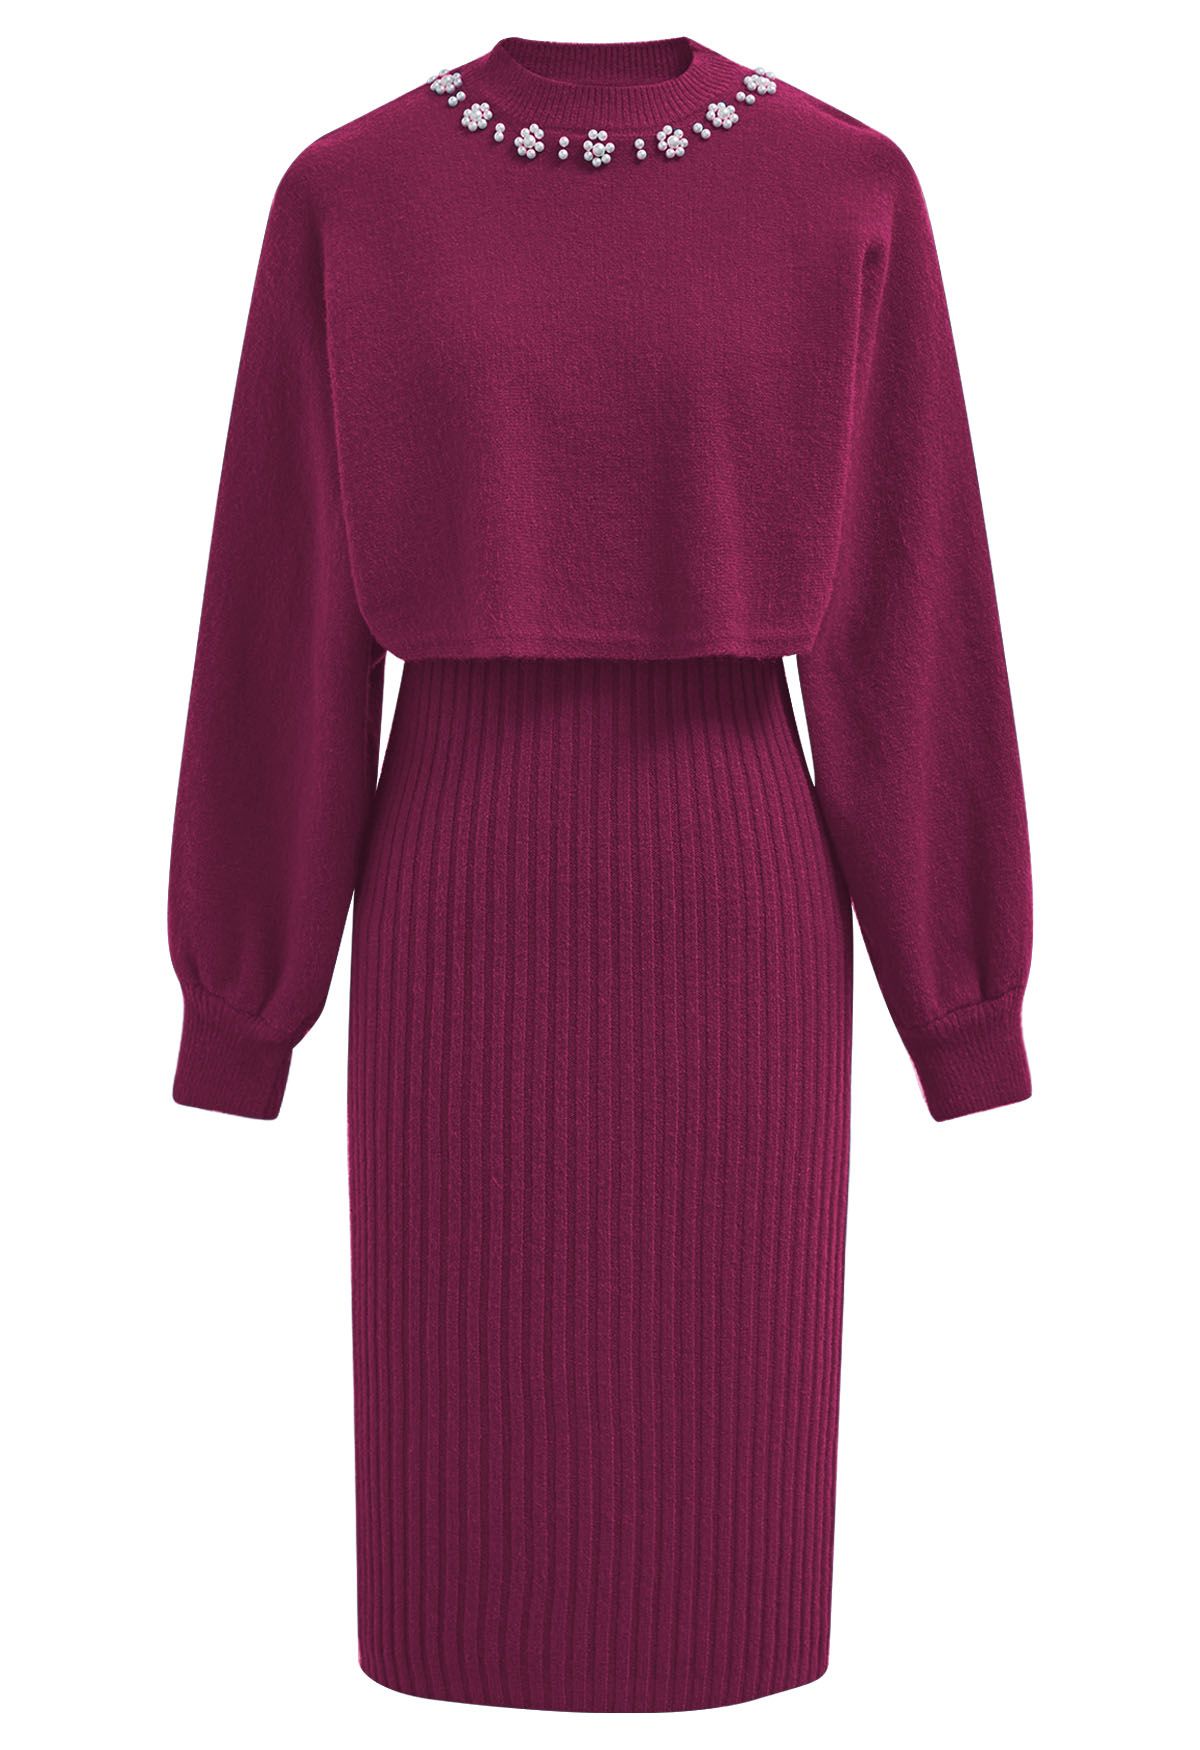 Pearl Neckline Ribbed Knit Twinset Dress in Magenta